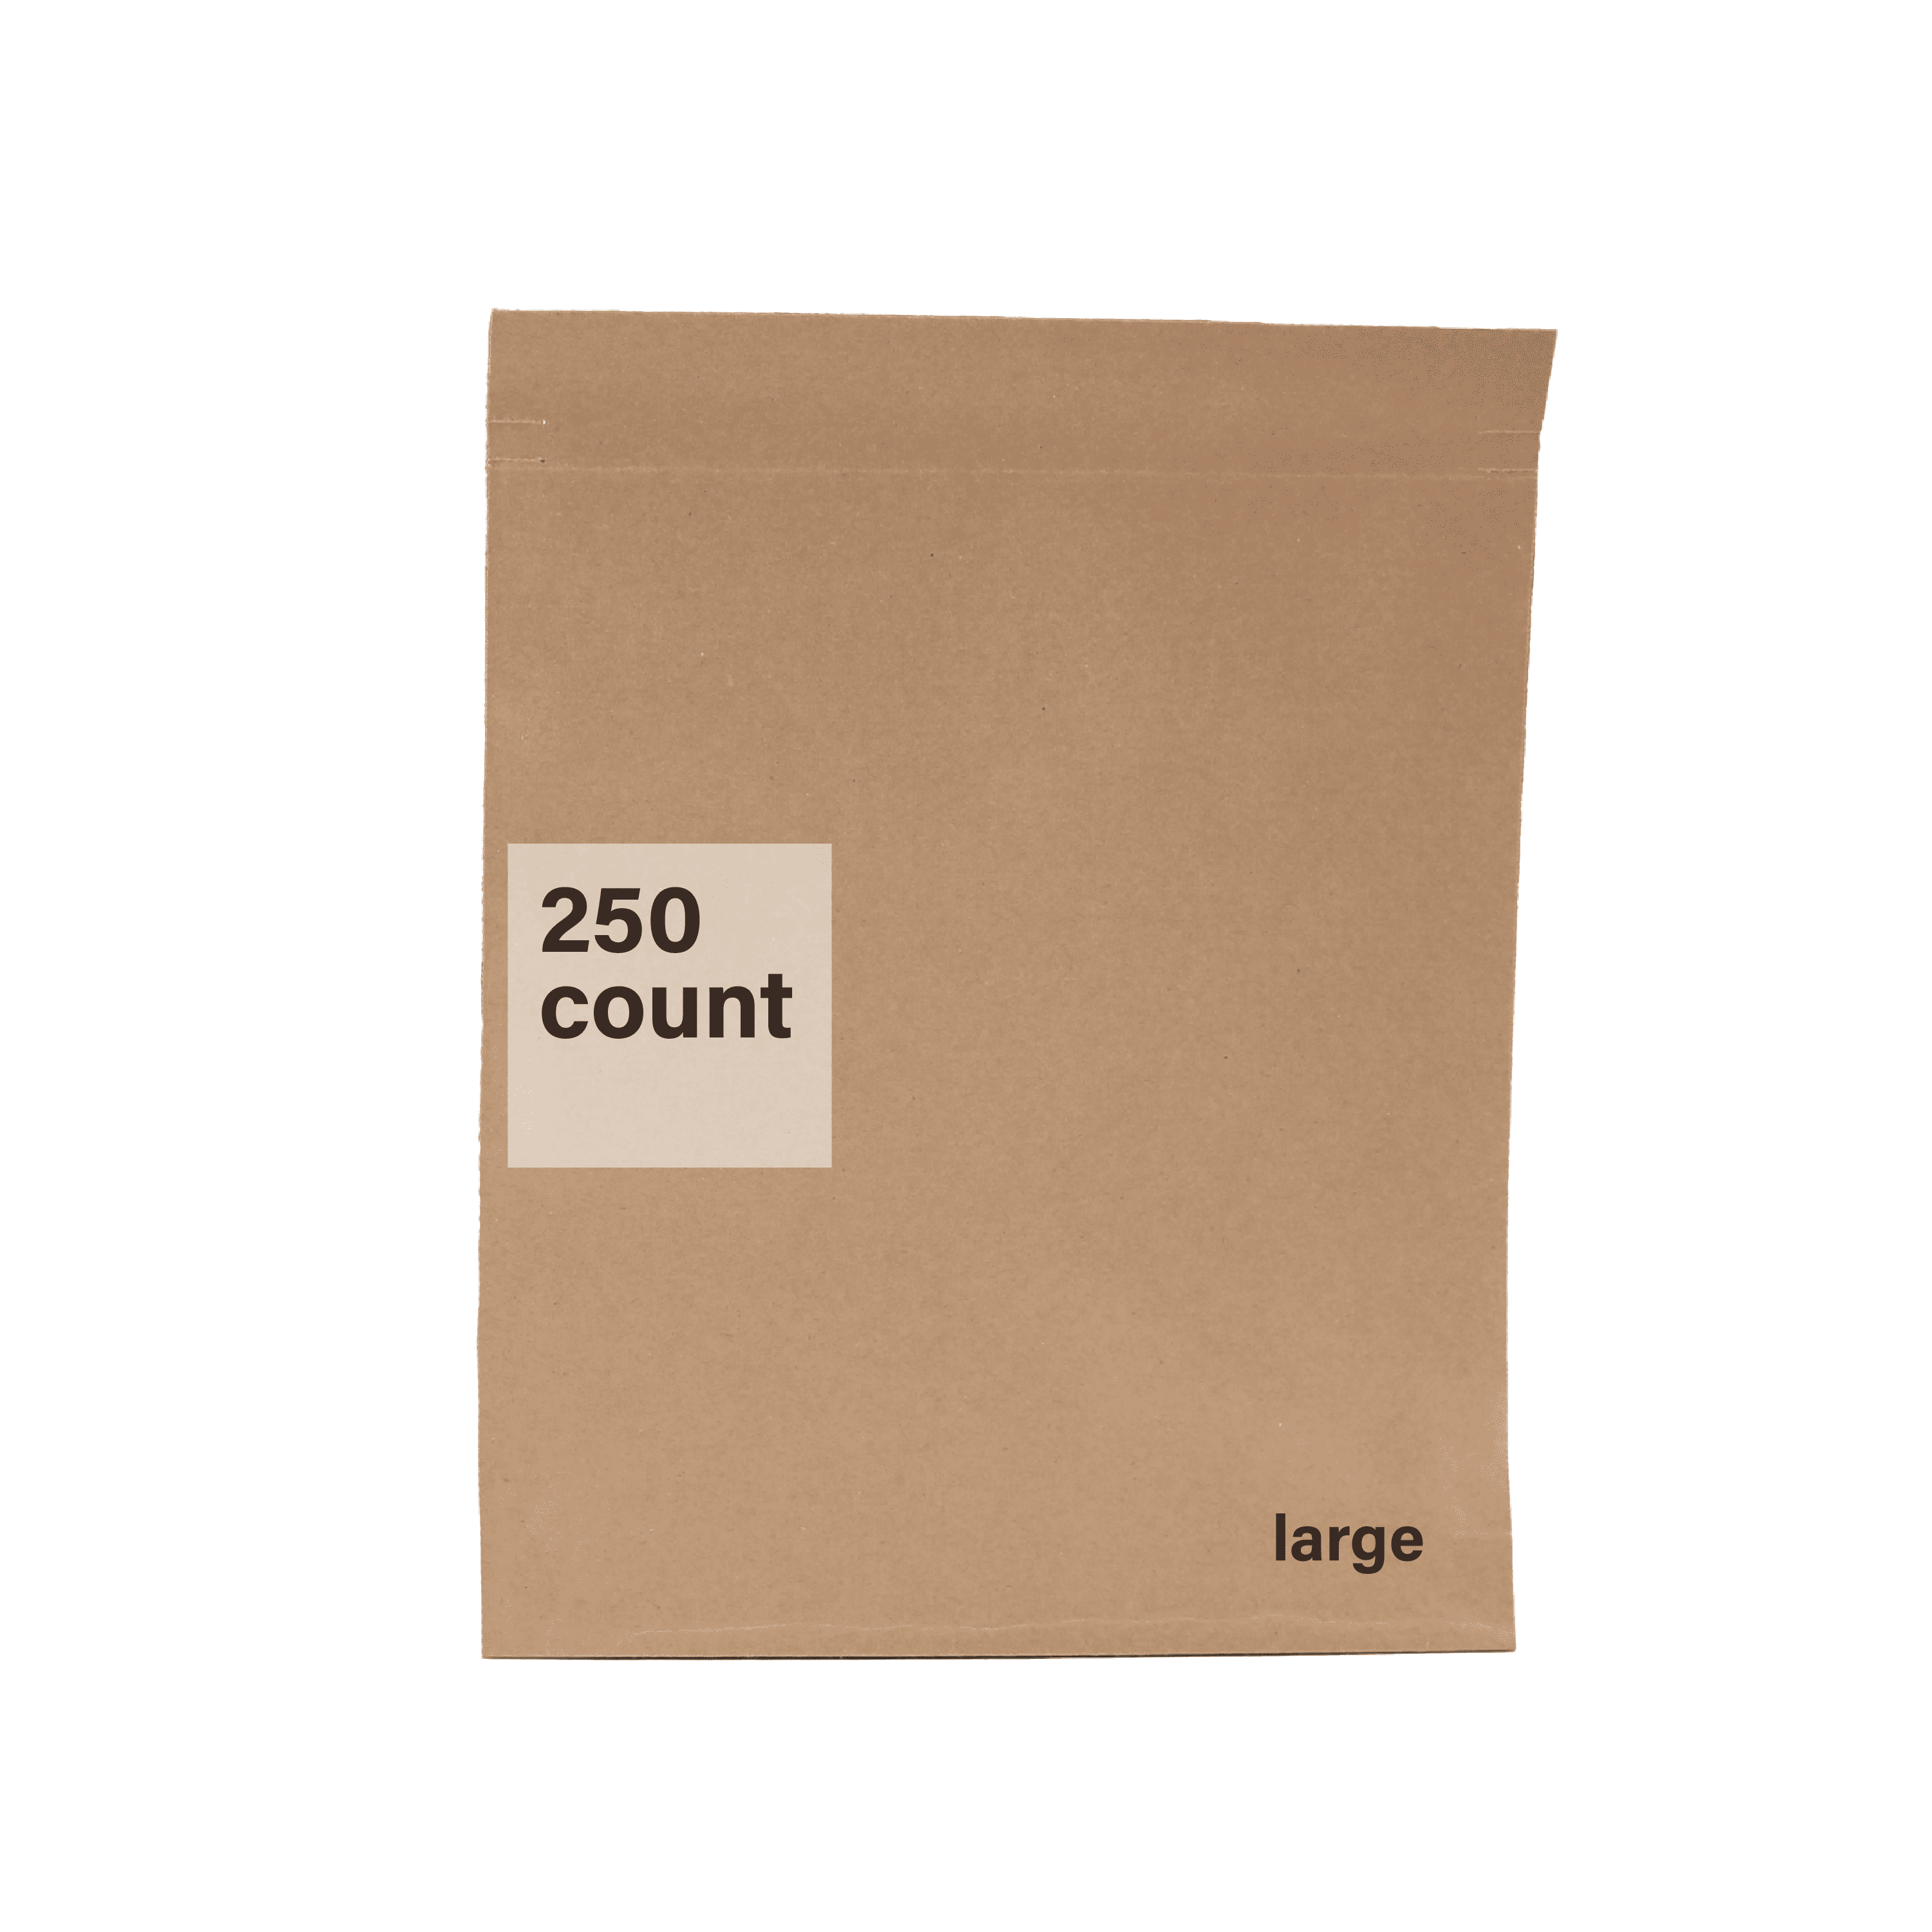 Elementree Sustainable Expandable Paper Mailer, Large 25 Count